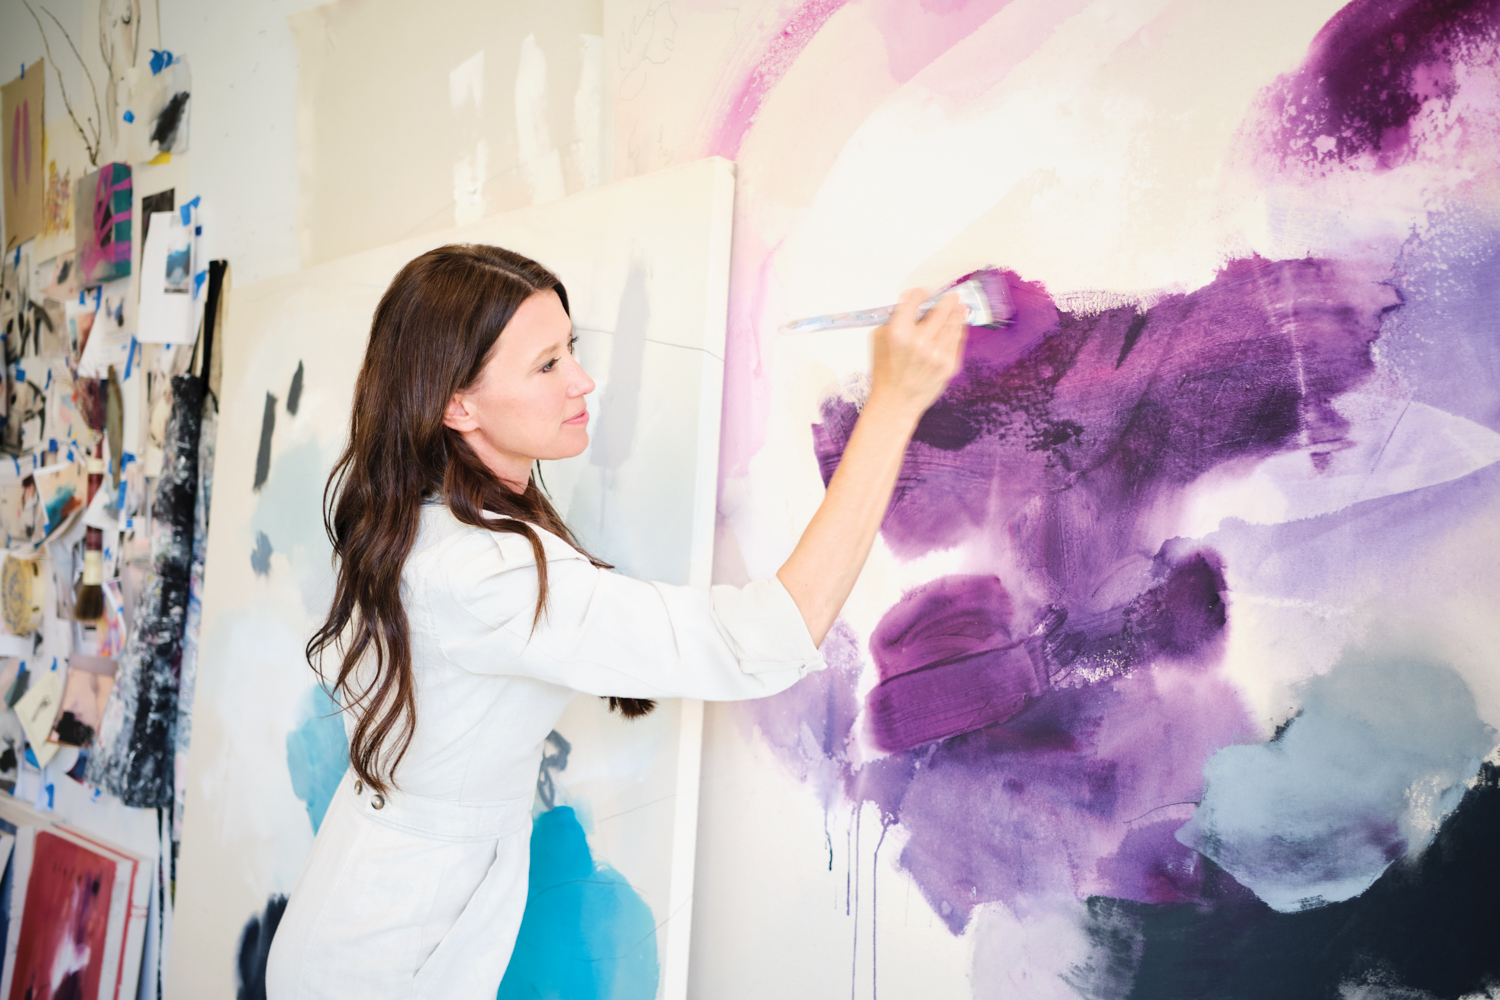 Melissa Herrington holding paintbrush against large canvas with purple abstract images